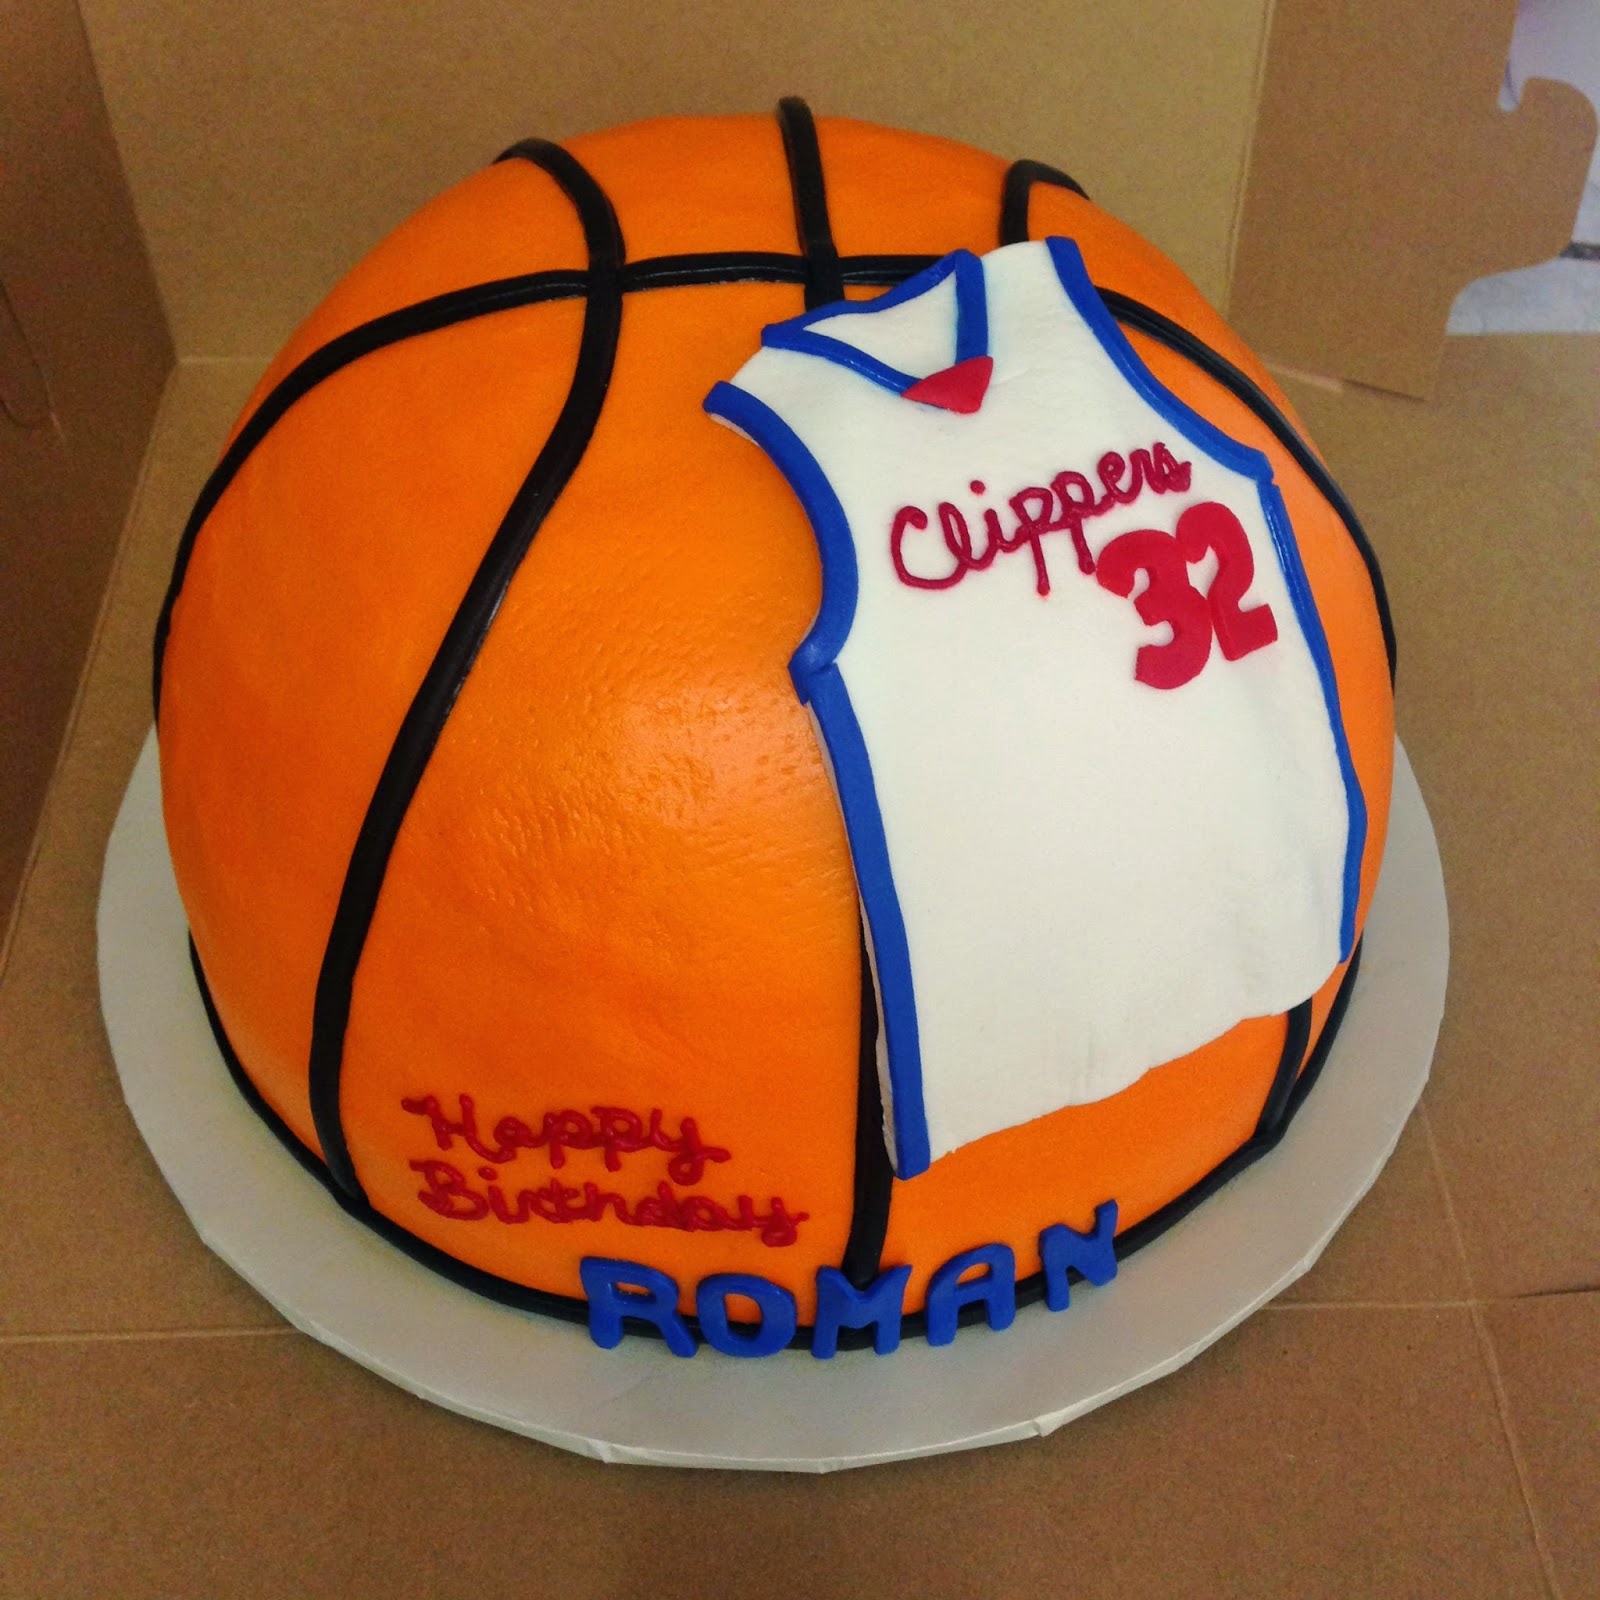 Cakes by Mindy: LA Clippers Basketball Cake 10"